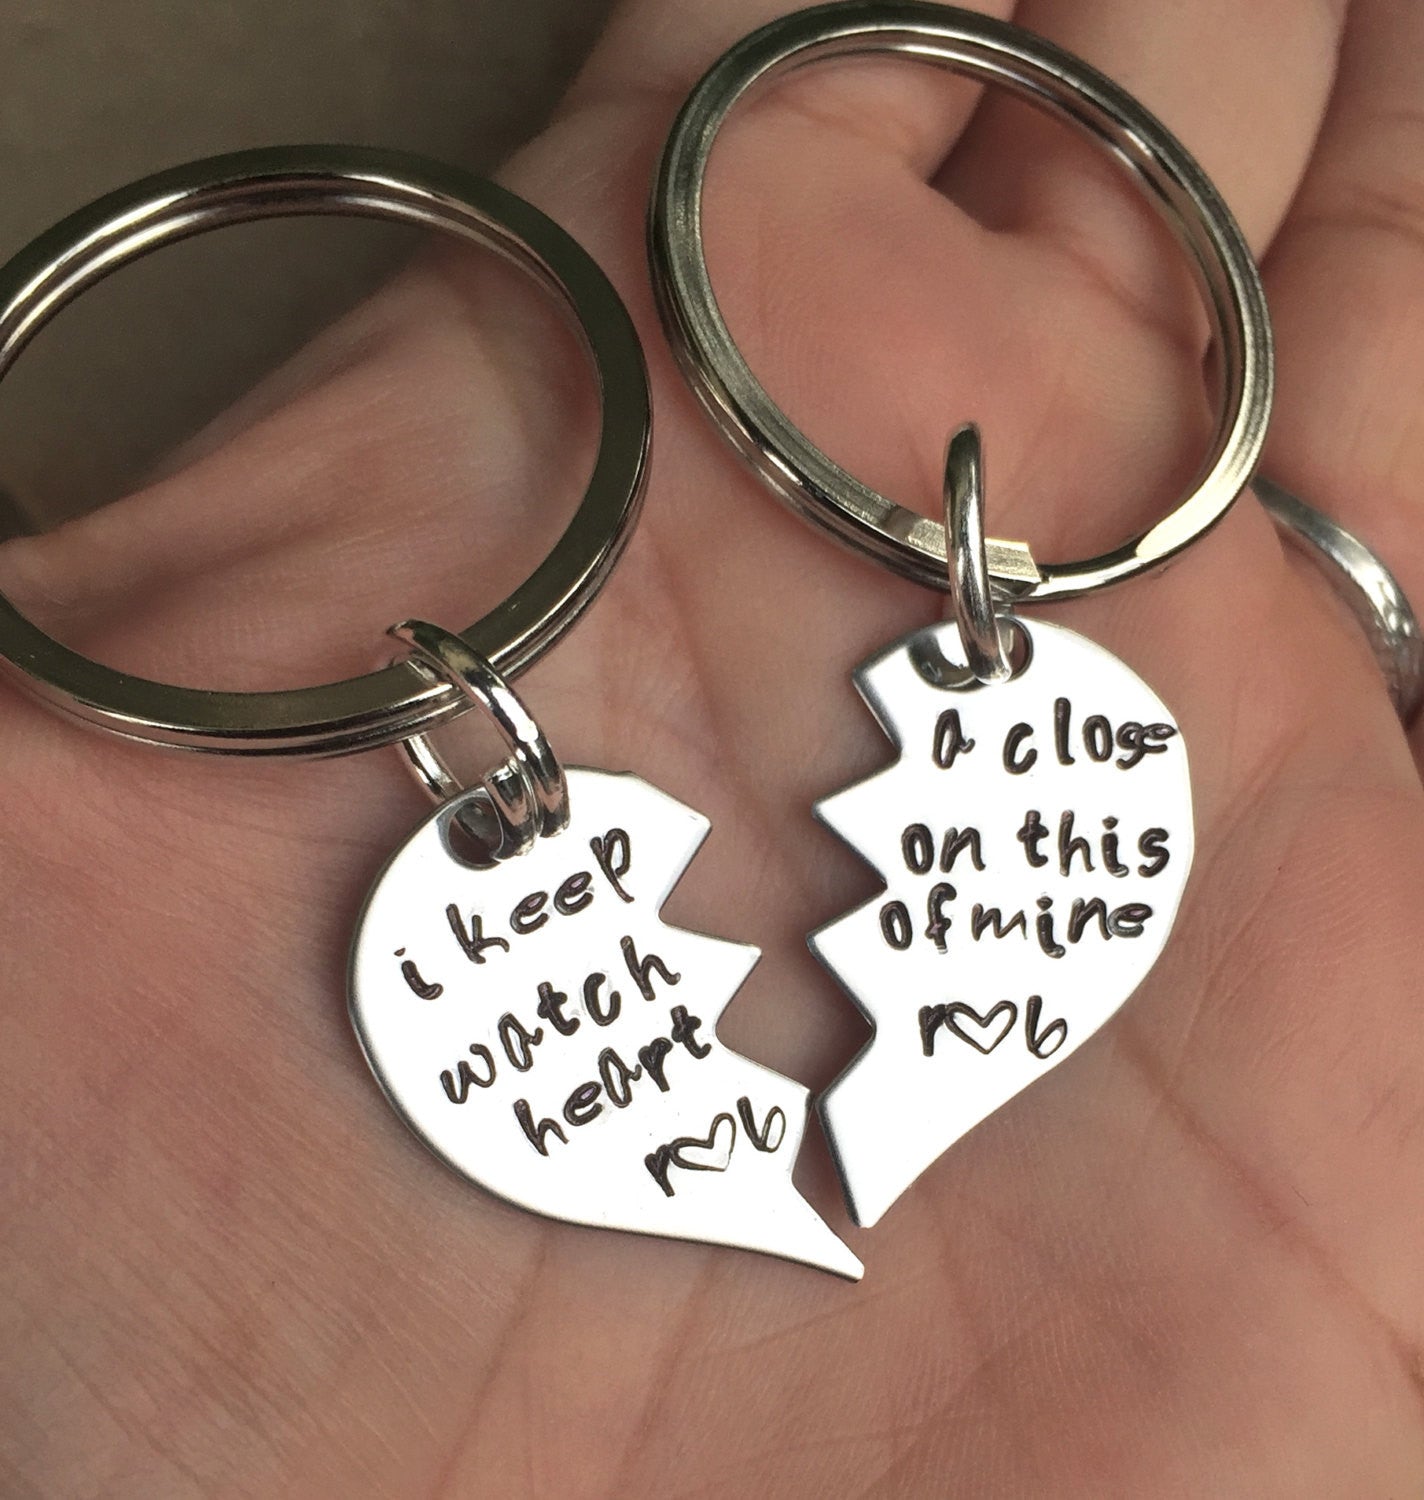 I Keep A Close Watch On This Heart Of Mine Keychain - Natashaaloha, jewelry, bracelets, necklace, keychains, fishing lures, gifts for men, charms, personalized, 